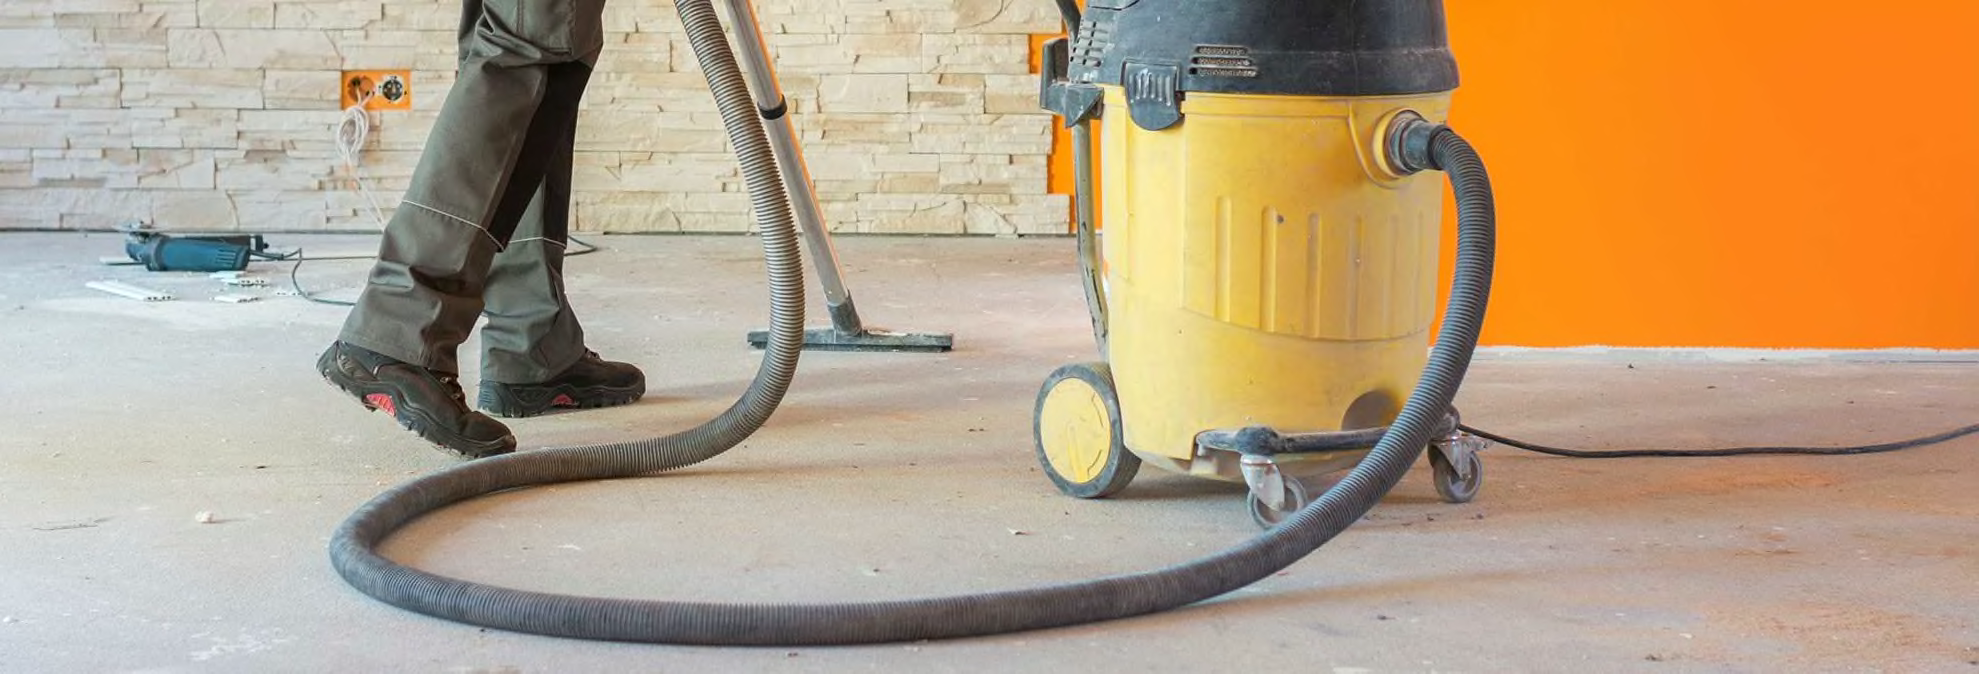 How To Use A Shop Vac To Vacuum Above Ground Pool the following instead: As you may tell from|distinguish} our recommendations, we actually like cordless shop vacs for automotive use.</p>
<h3 id=